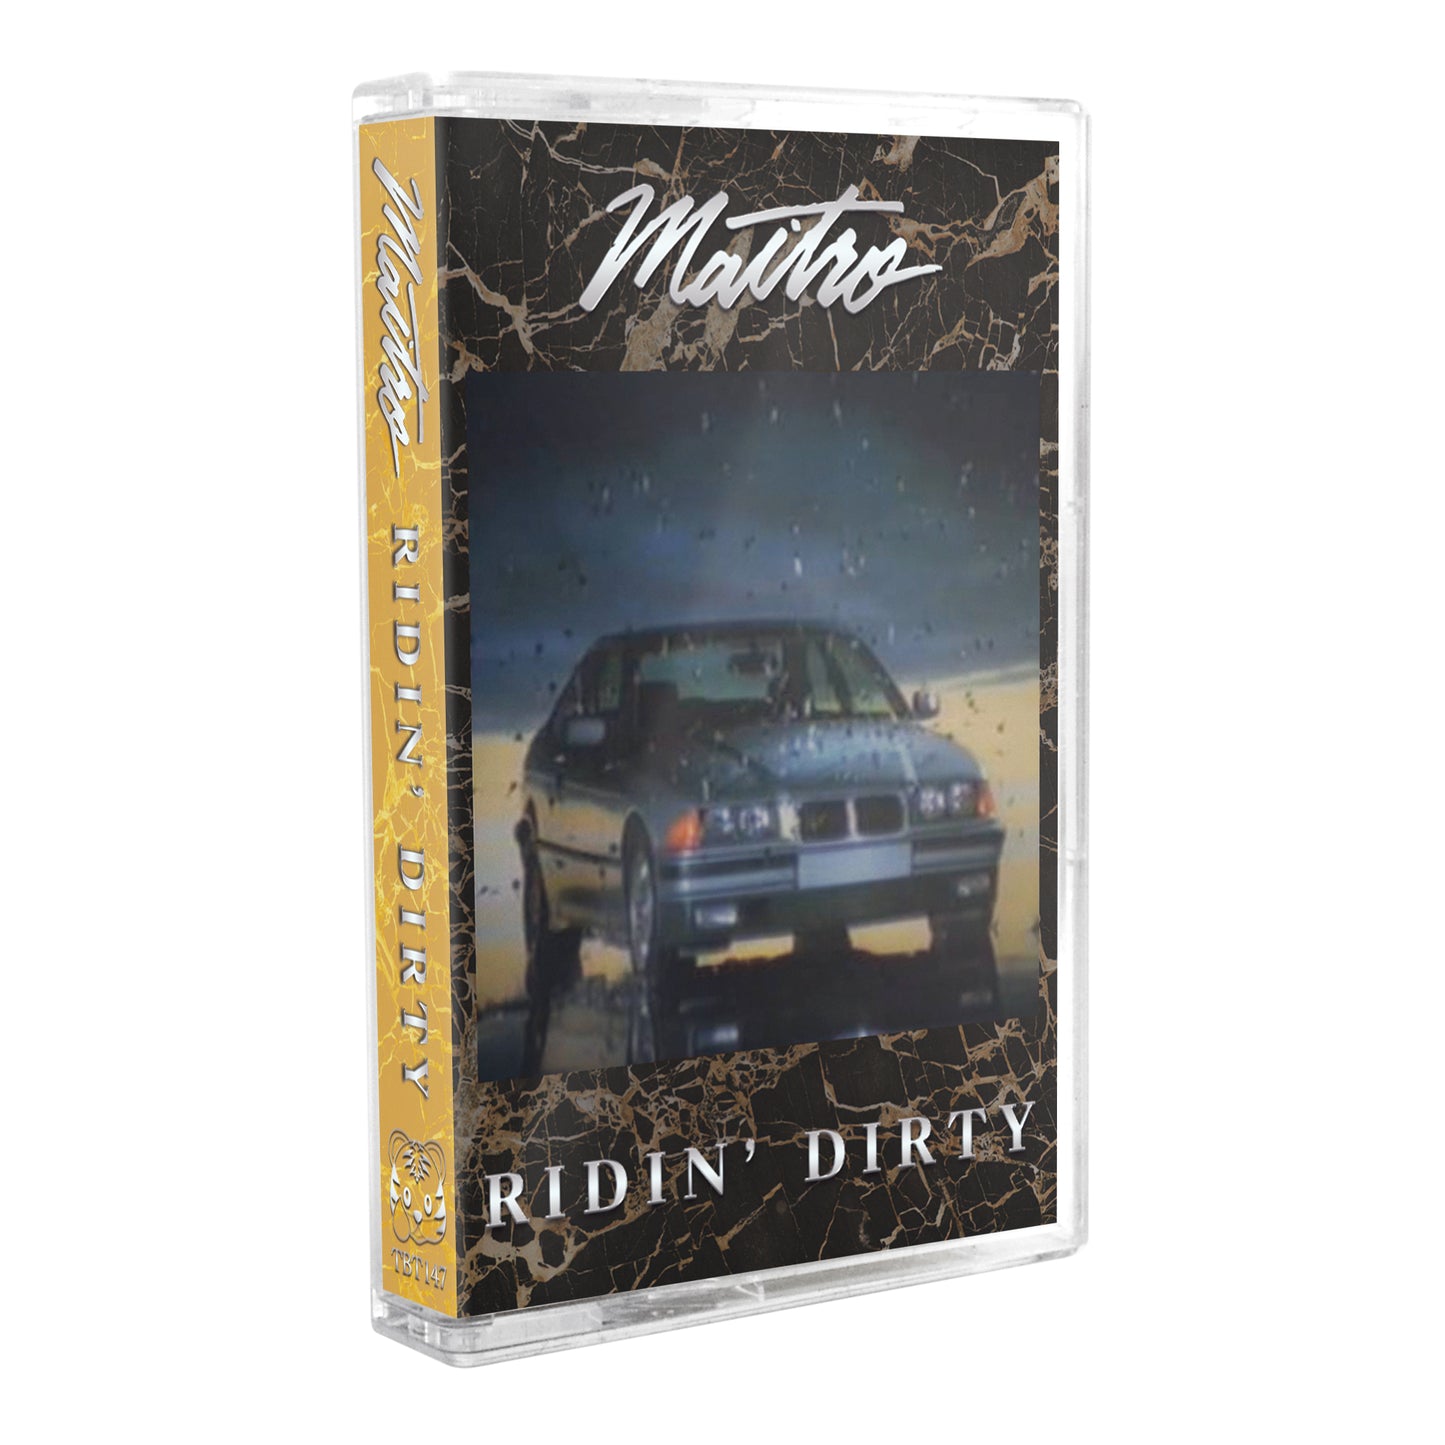 Maitro - "Ridin Dirty'" Limited Edition Cassette Tape